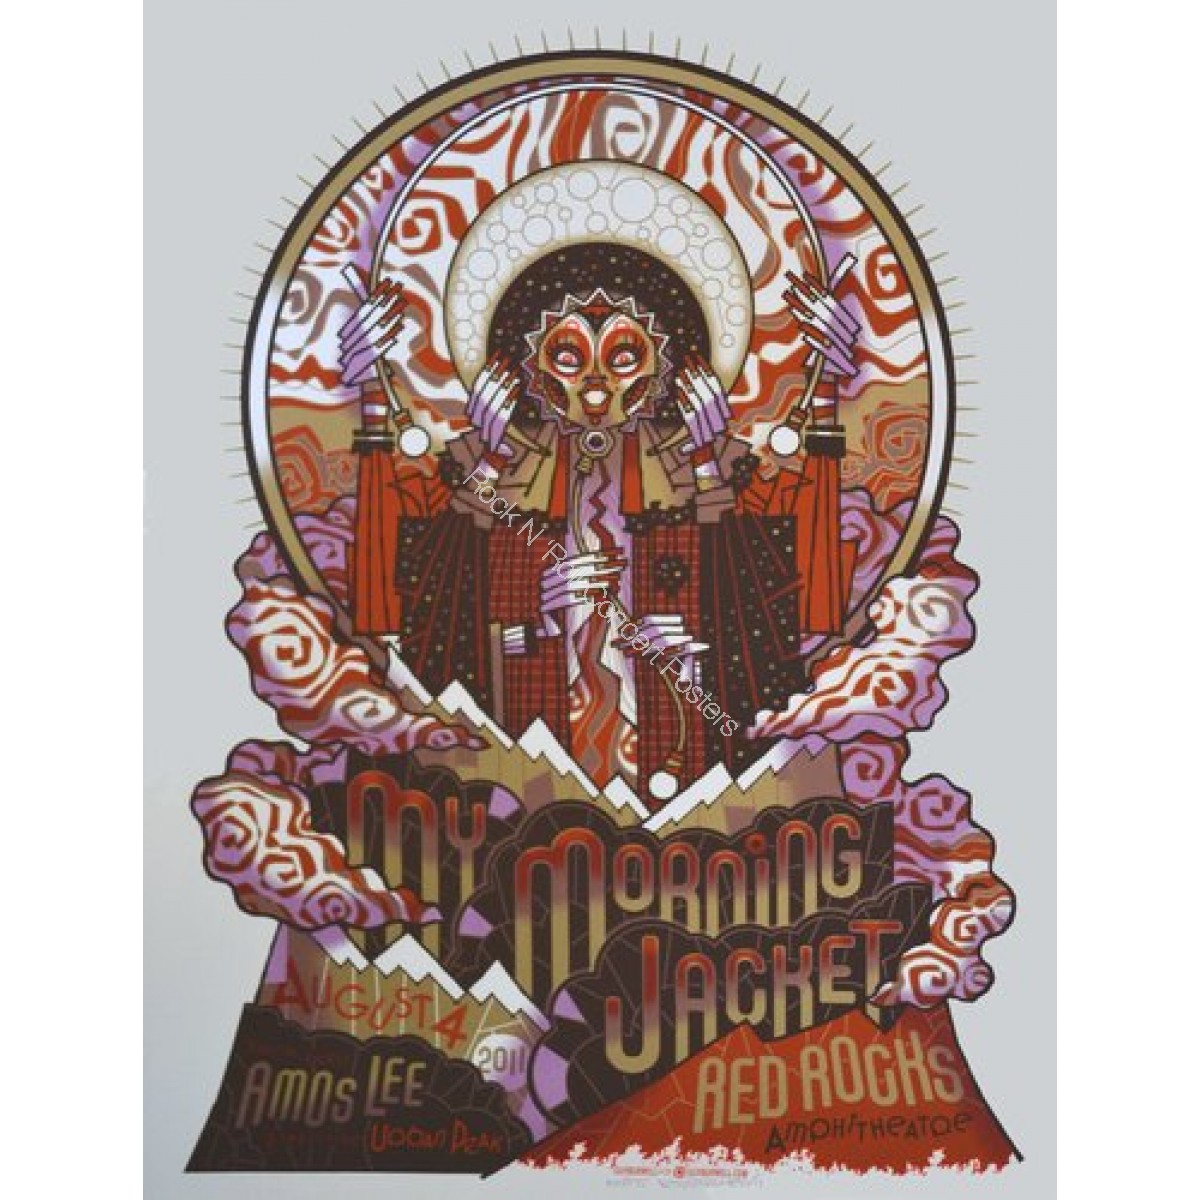 My Morning Jacket & Amos Lee @ Red Rocks 8/4/11 Limited Edition Print S/N  Edition of 275 By Guy Burwell | Concert Posters For Sale | RRCP